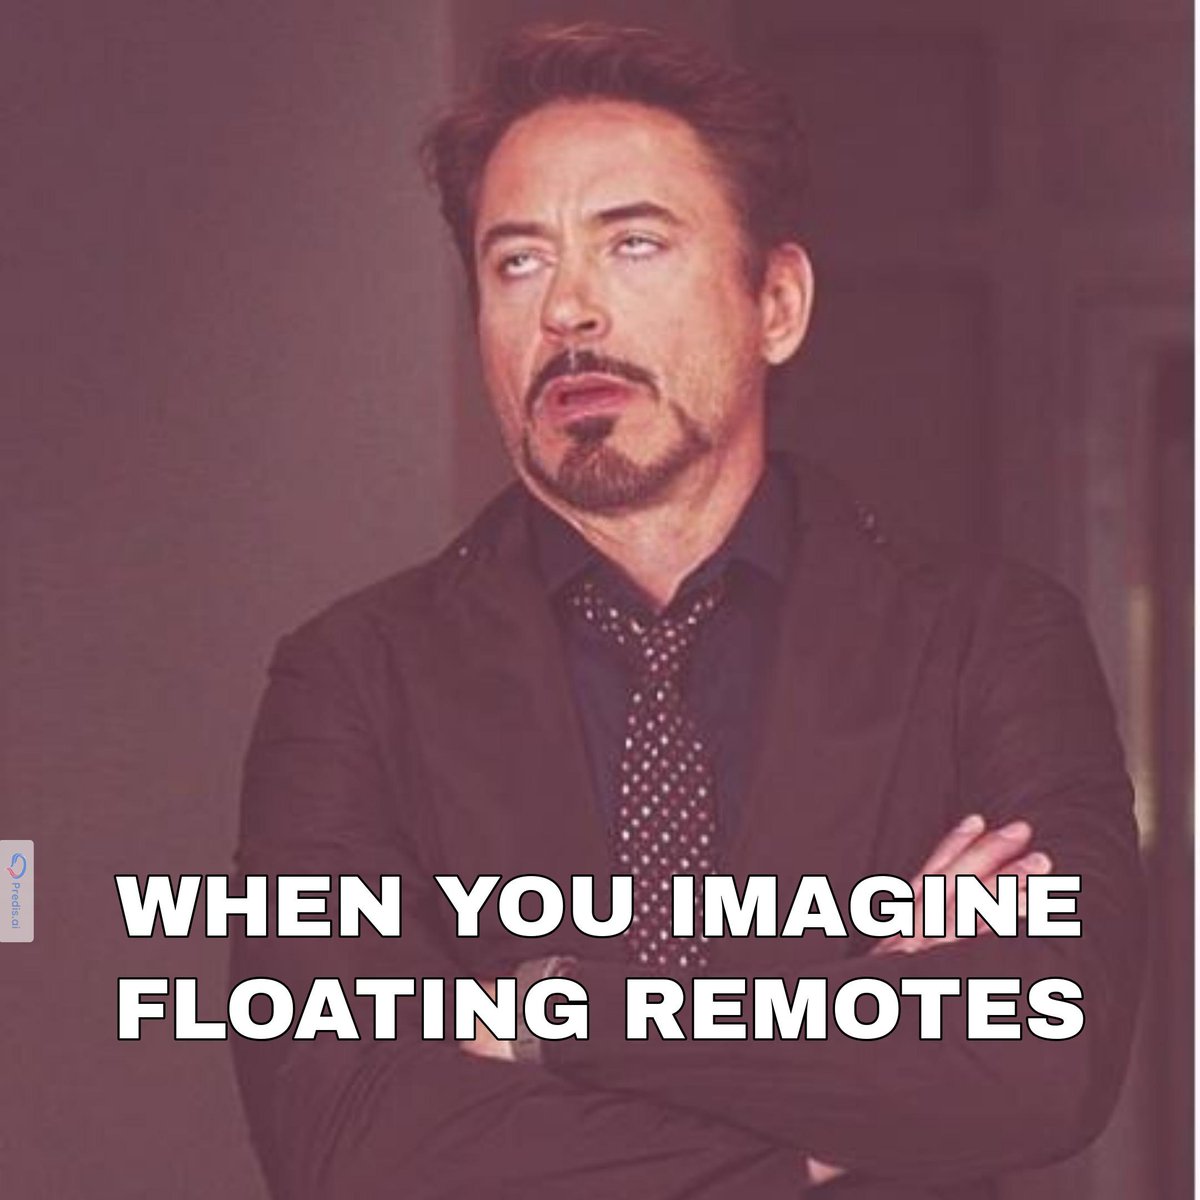 Visualization technique for overcoming #LazyPeoplePain: Imagining the remote magically floating to my hand. Reality: Still out of reach. 📺🧙‍♂️